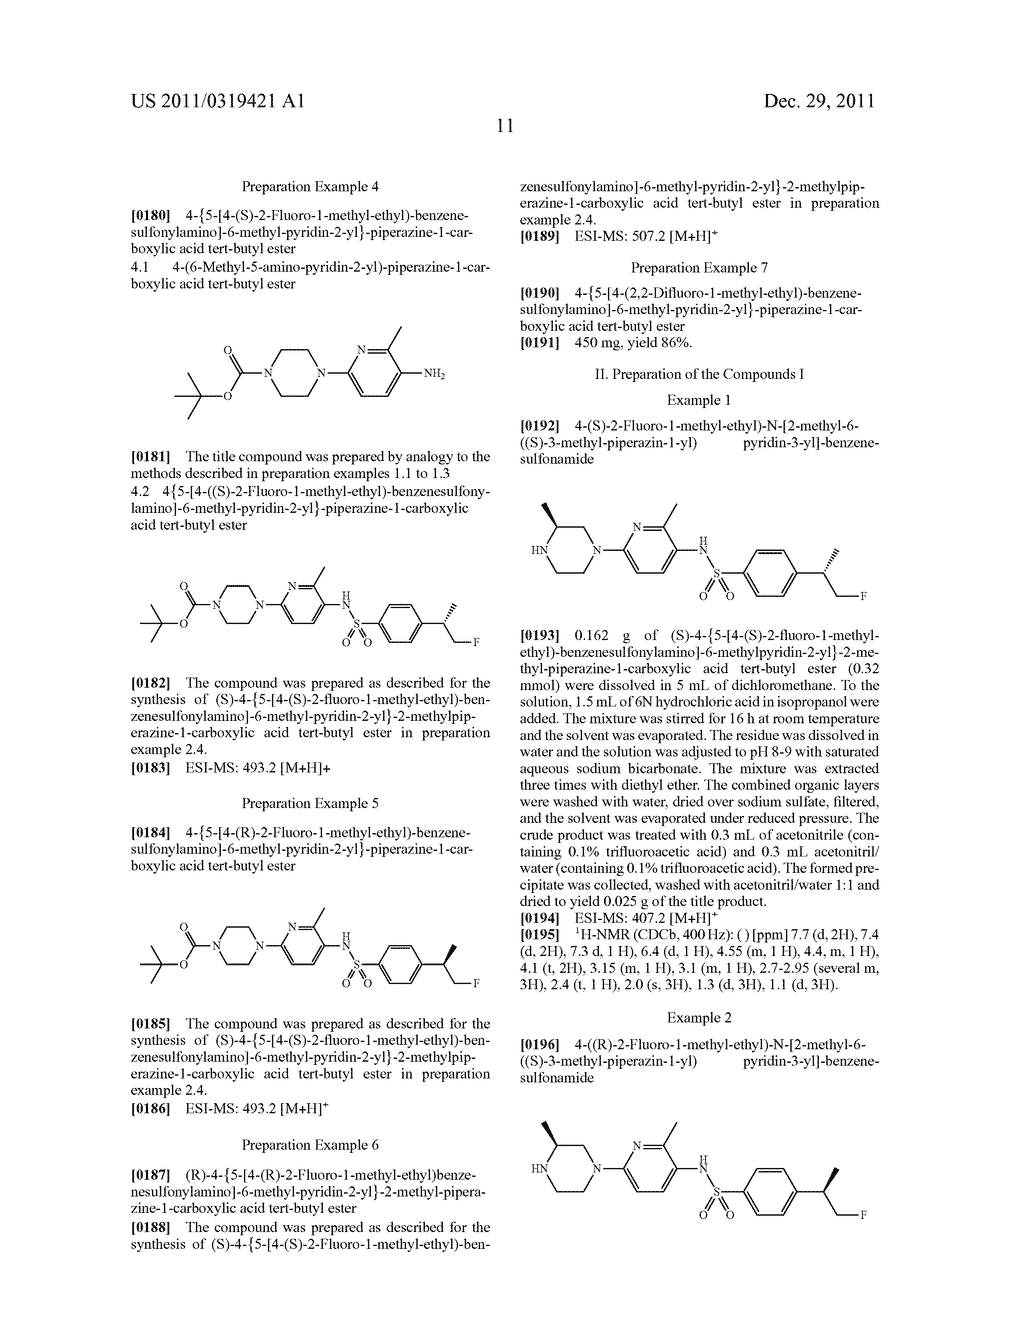 BENZENESULFONAMIDE COMPOUNDS SUITABLE FOR TREATING DISORDERS THAT RESPOND     TO MODULATION OF THE DOPAMINE D3 RECEPTOR - diagram, schematic, and image 12